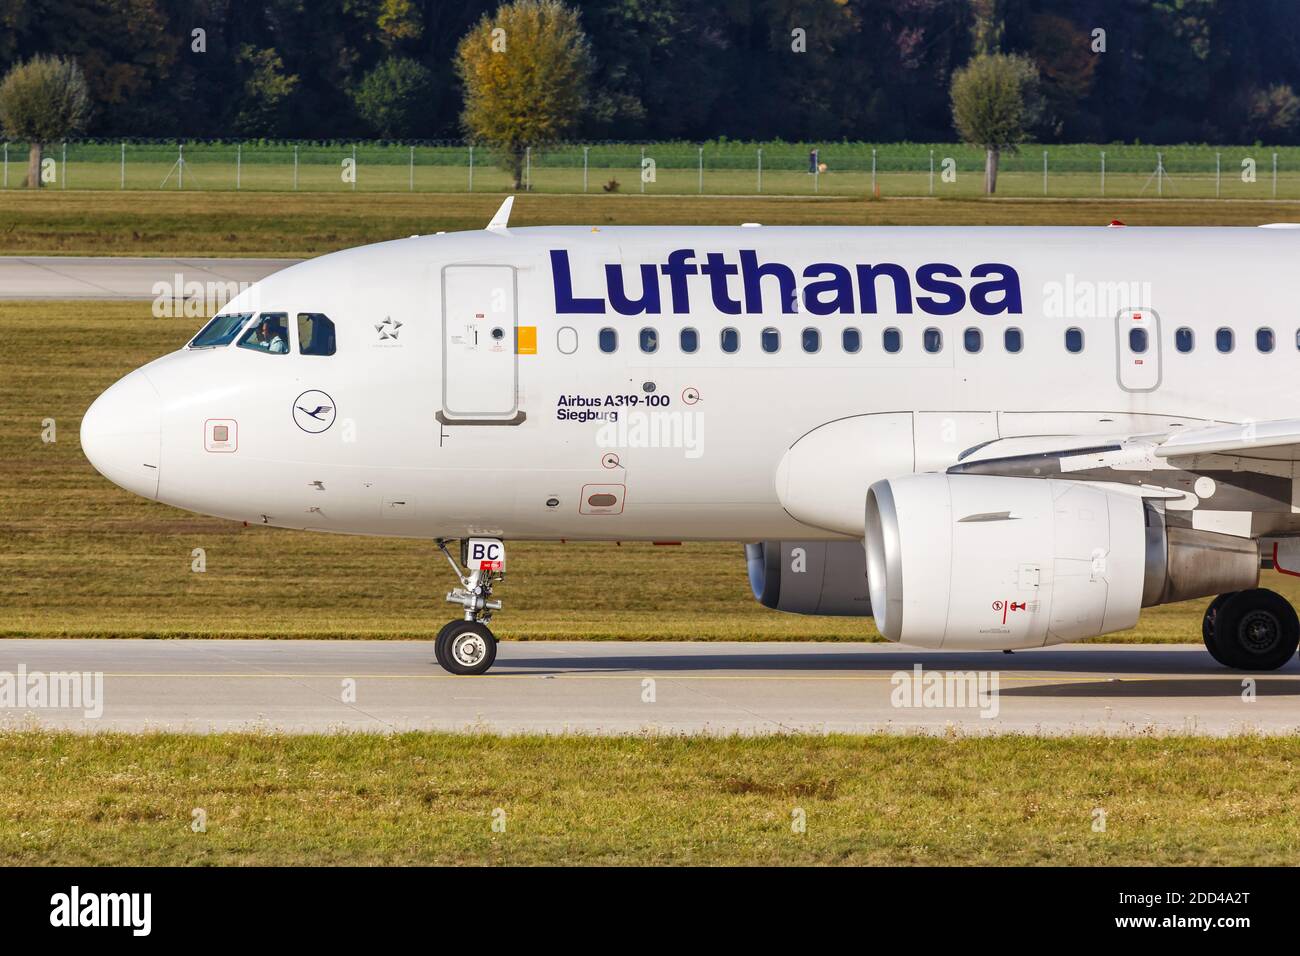 Munich, Germany - October 21, 2020: Lufthansa Airbus A319 airplane at Munich Airport in Germany. Airbus is a European aircraft manufacturer based in T Stock Photo